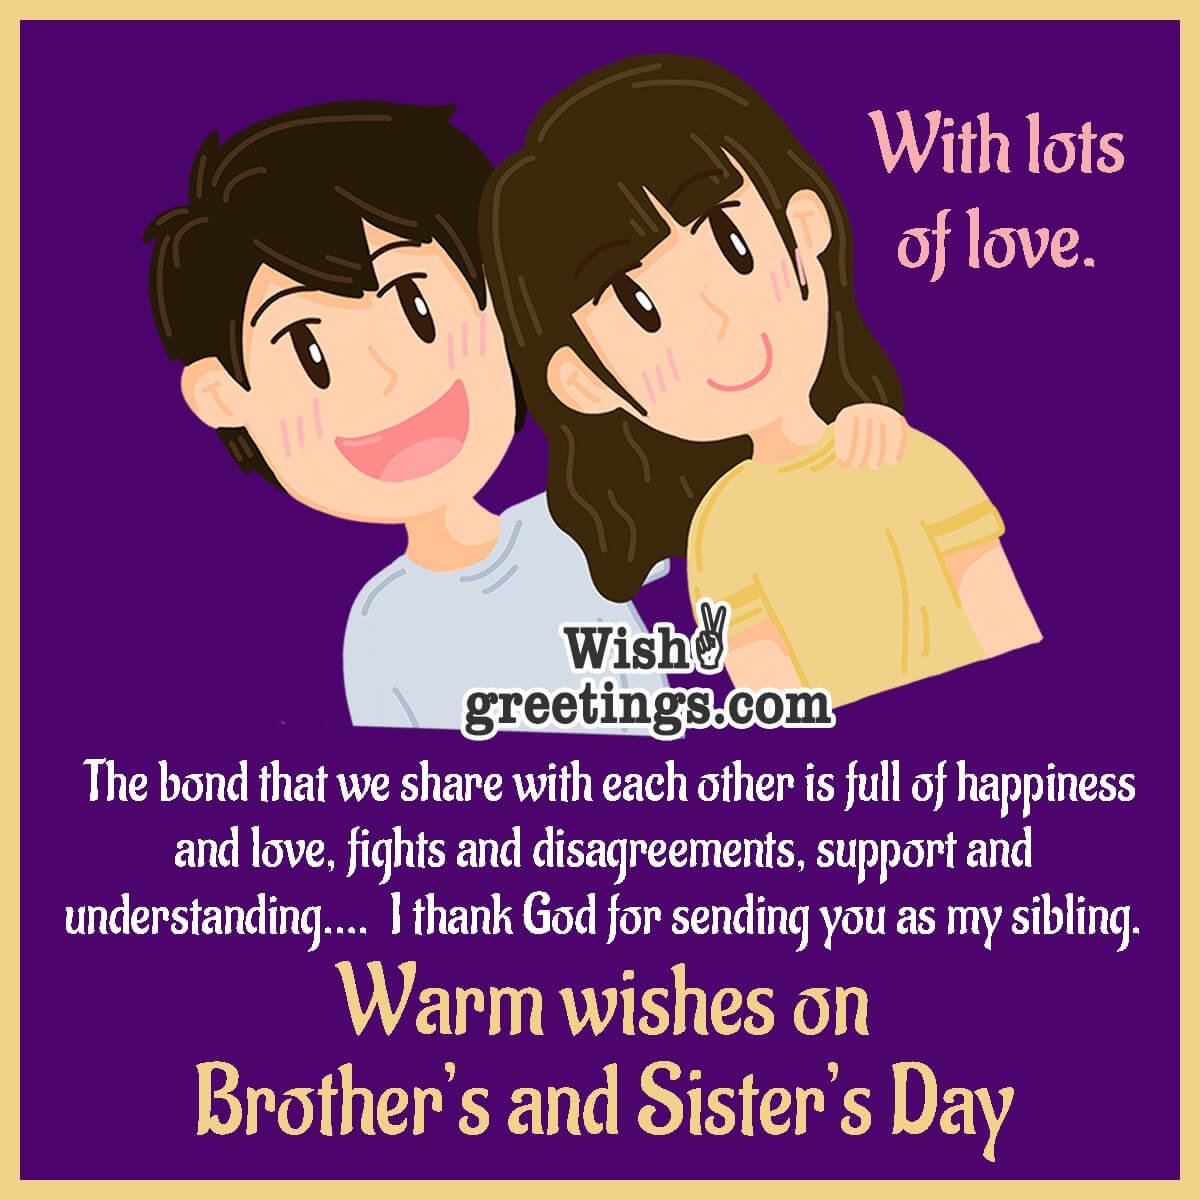 Brother’s and Sister’s Day Wishes Messages Wish Greetings